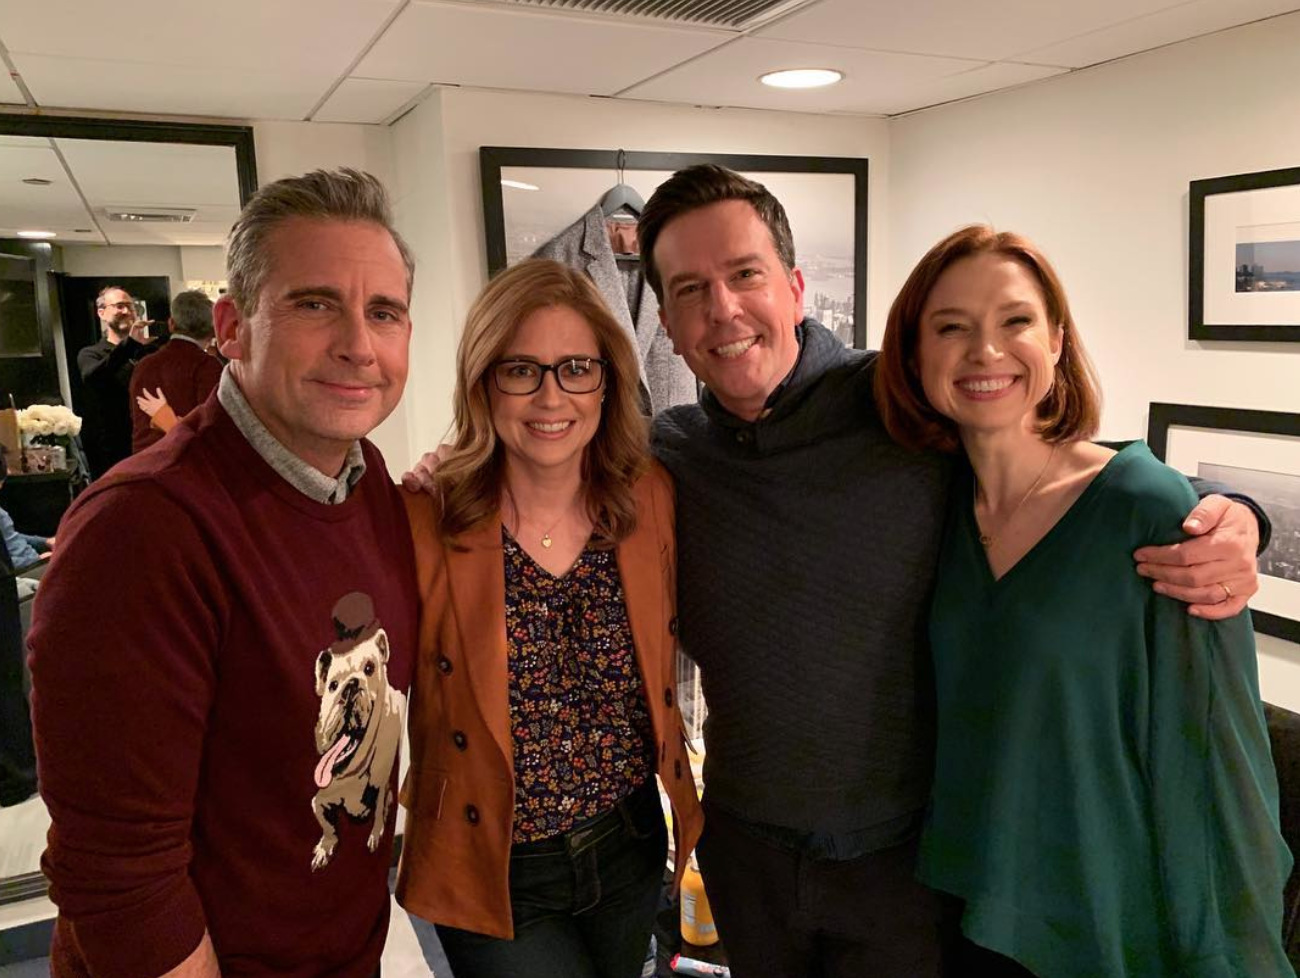 All The Times The Office Cast Has Reunited Over The Years